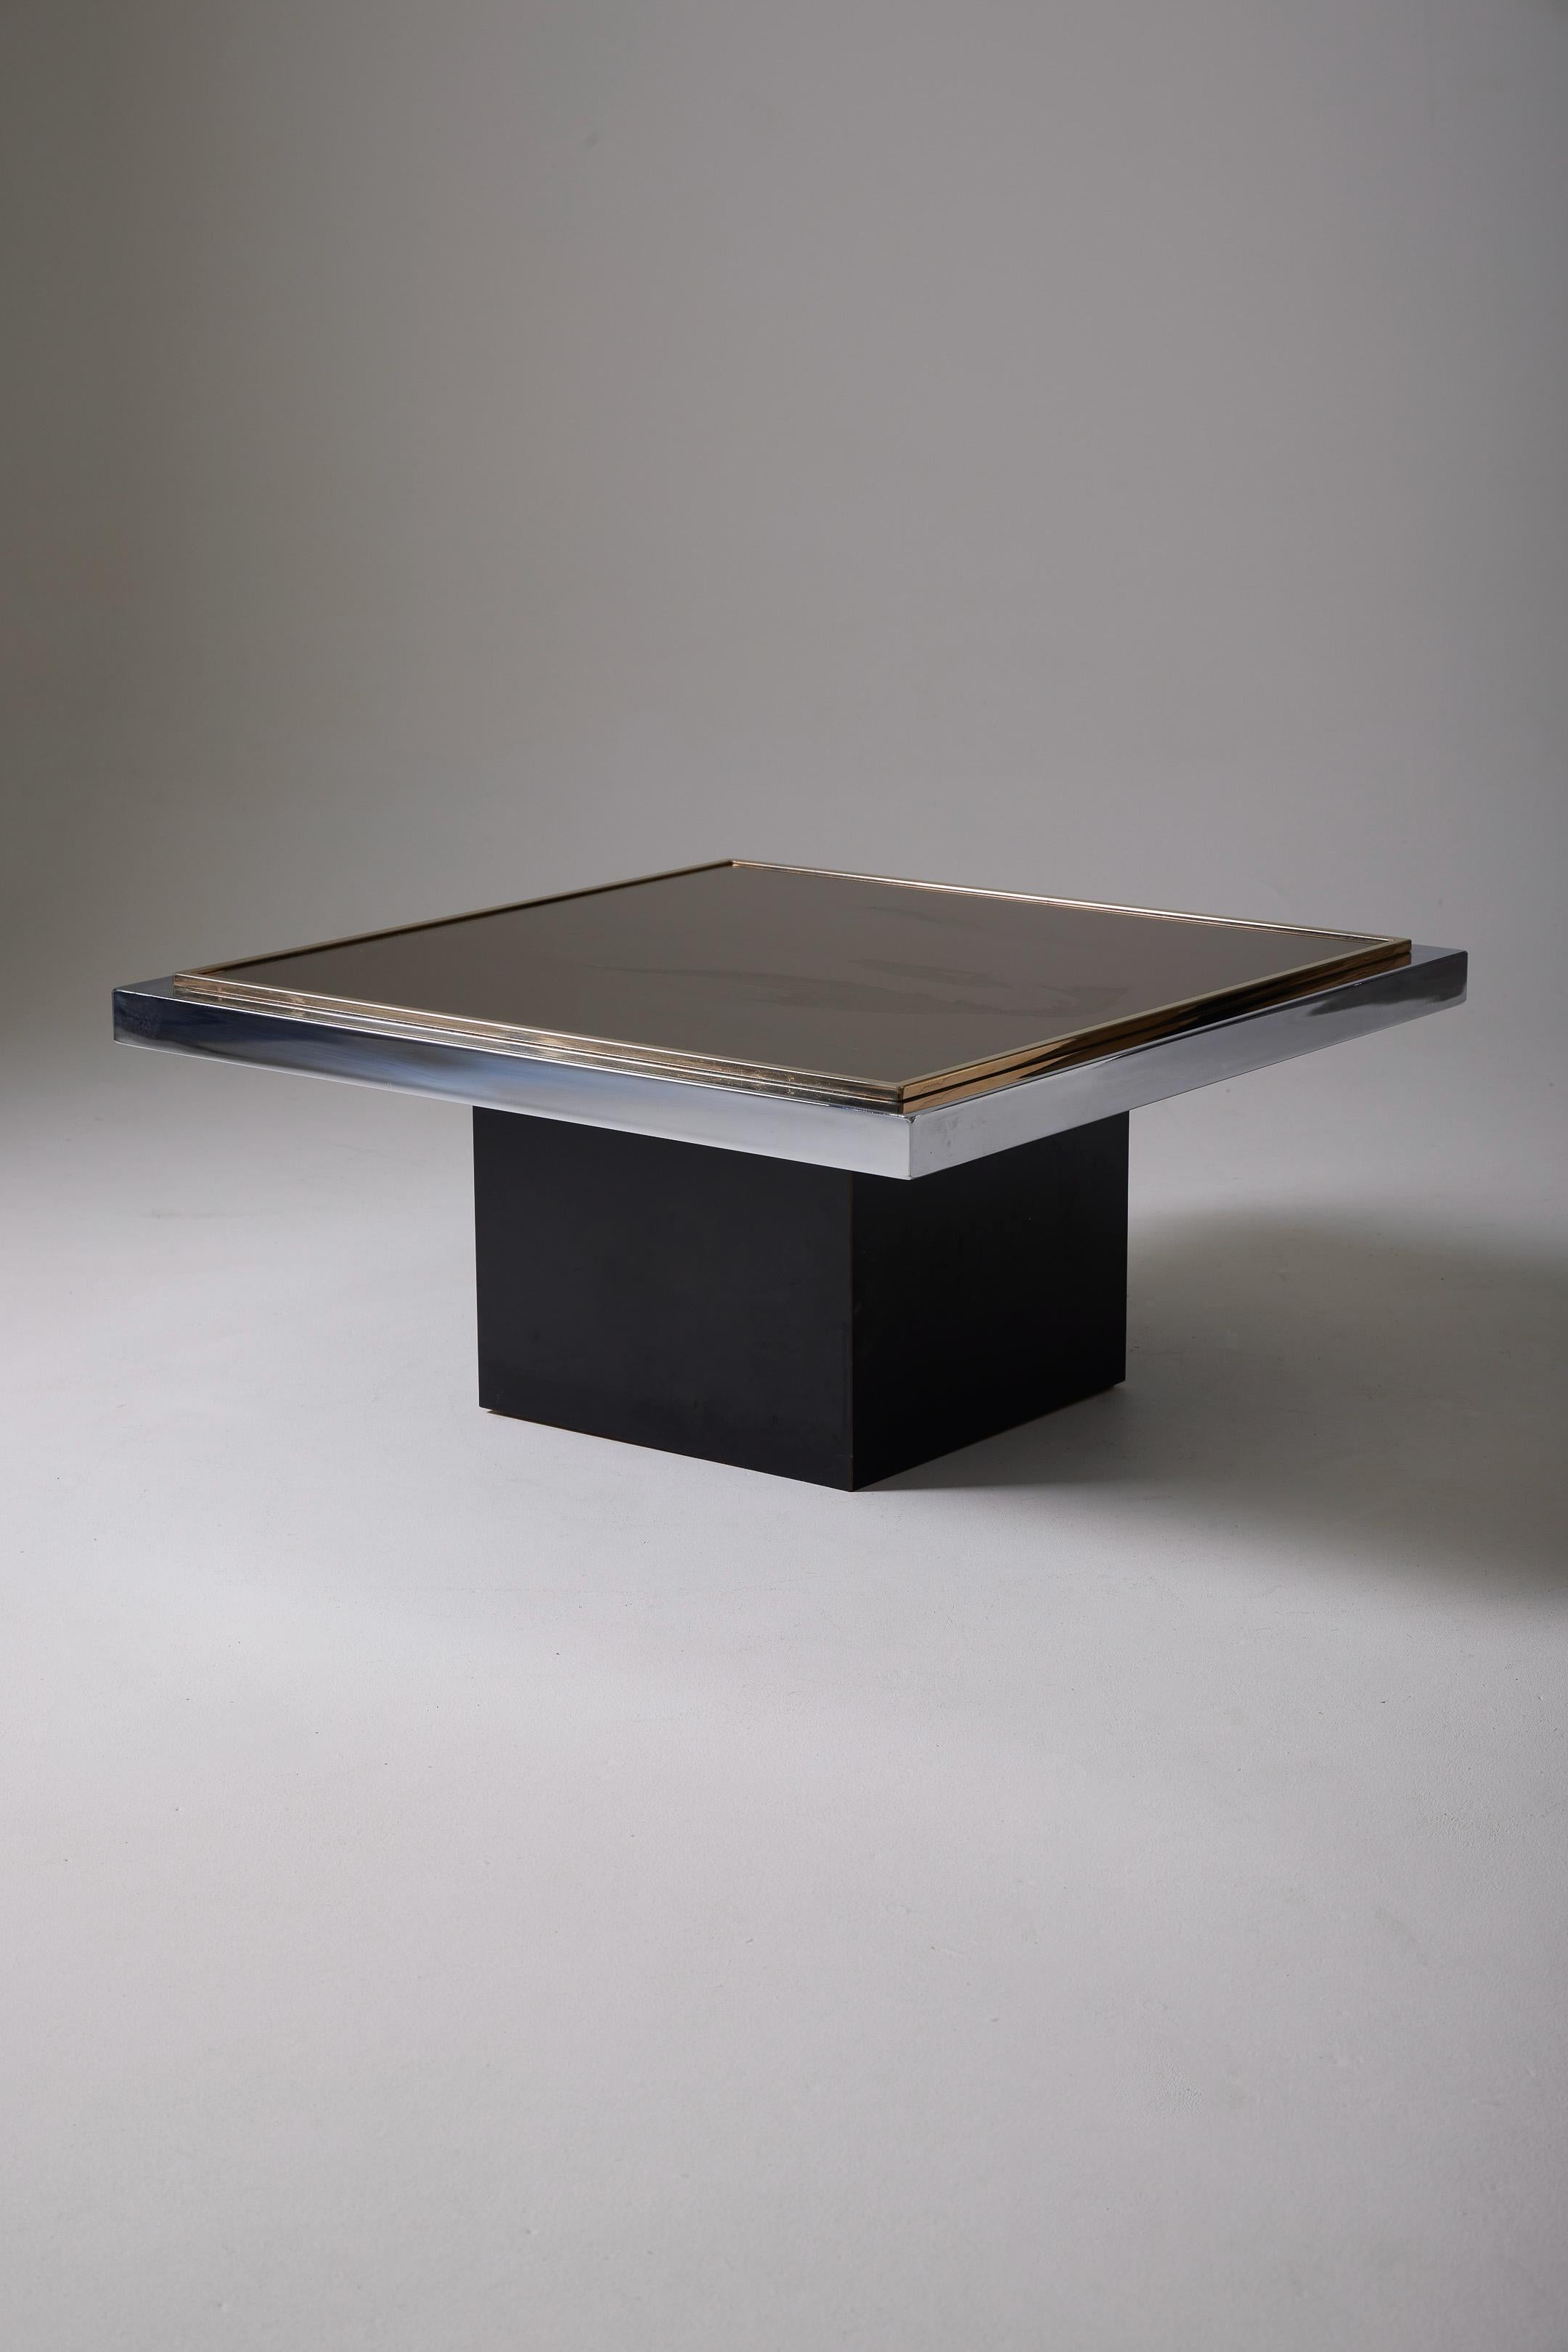  Square coffee table from the 1970s, the top consists of a mirrored glass plate framed in brass and chrome metal, with a black-colored wooden base. Very good condition.
LP3009